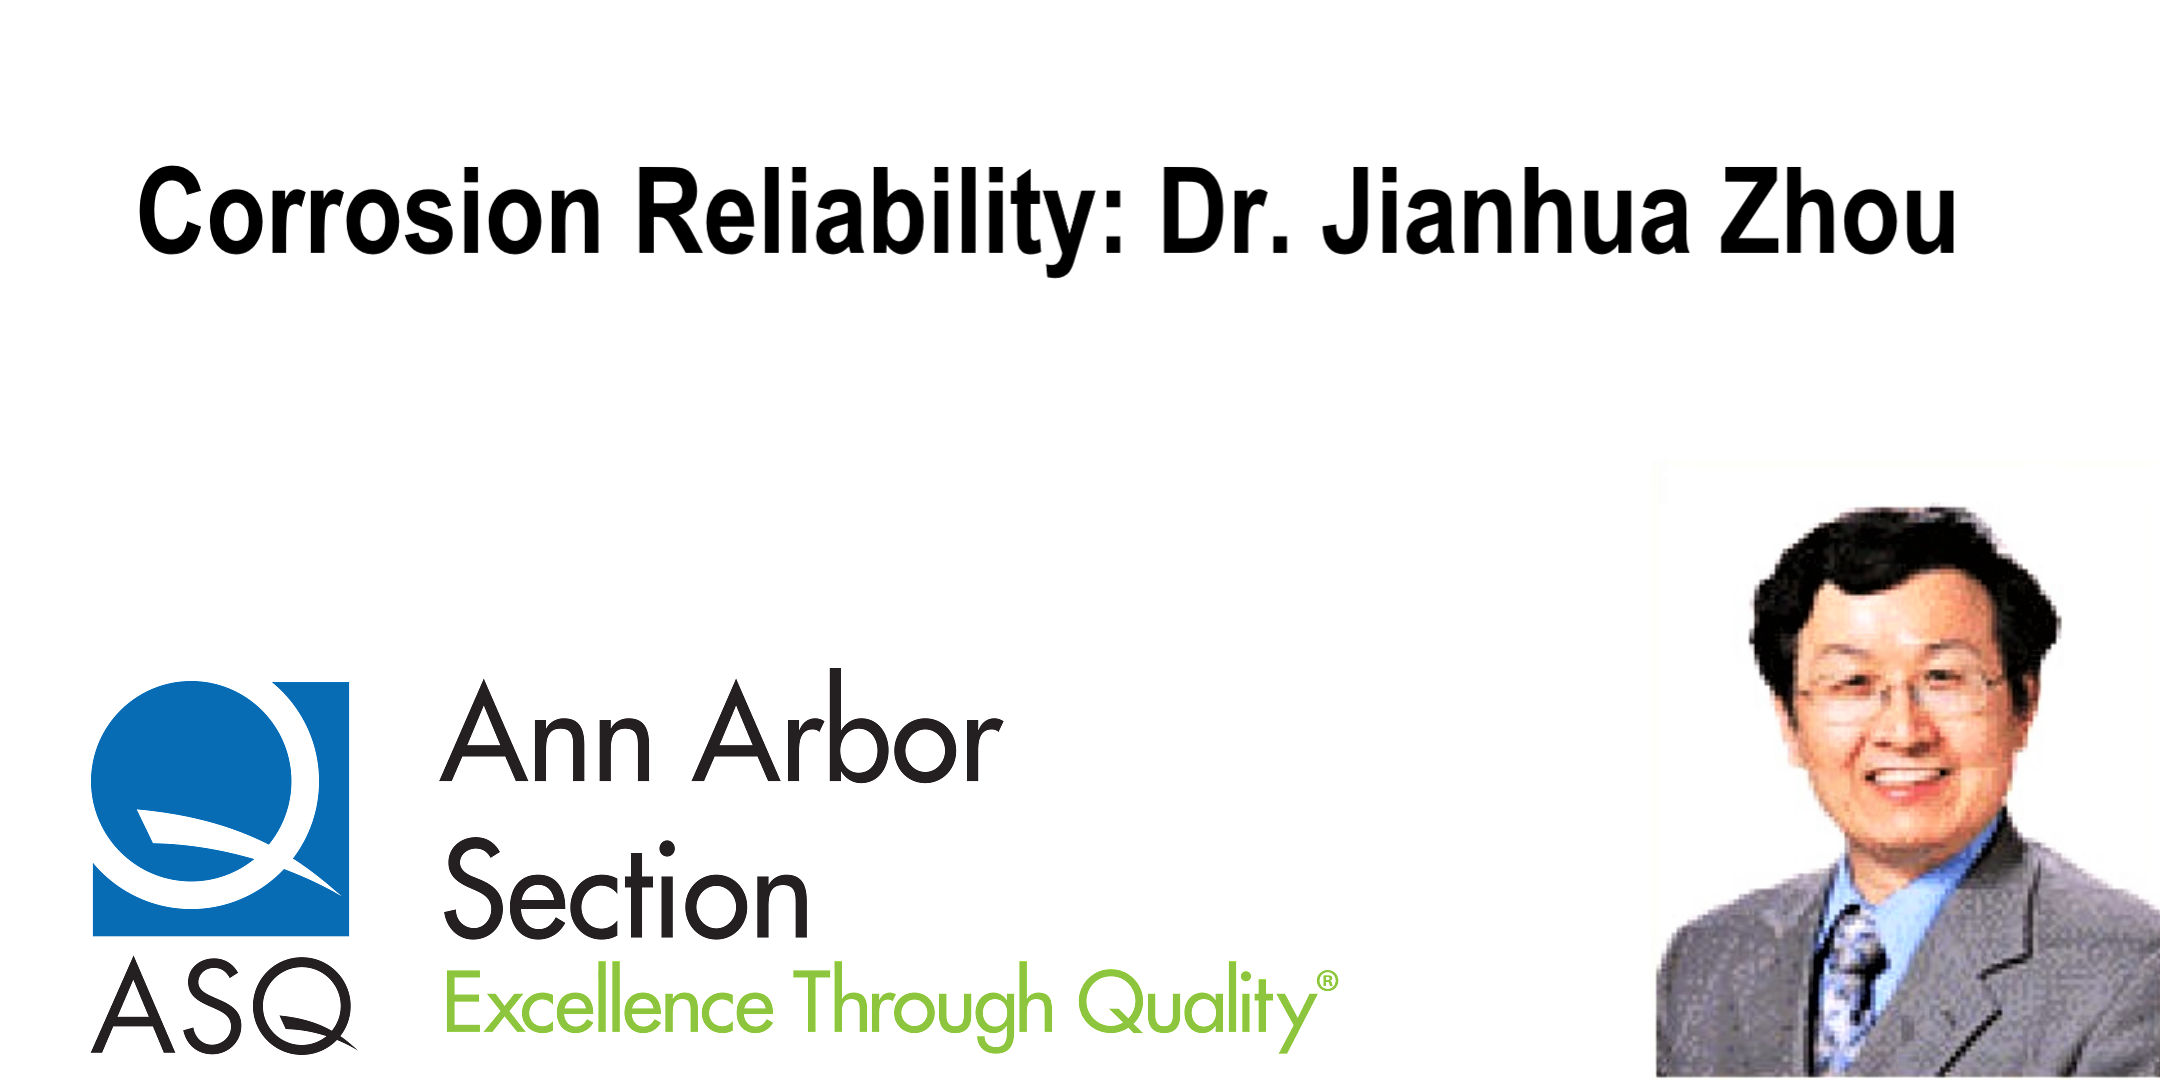 Ann Arbor Section Meeting Monday 03MAY21:  Dr. Jianhua Zhou, Corrosion Reliability 2549